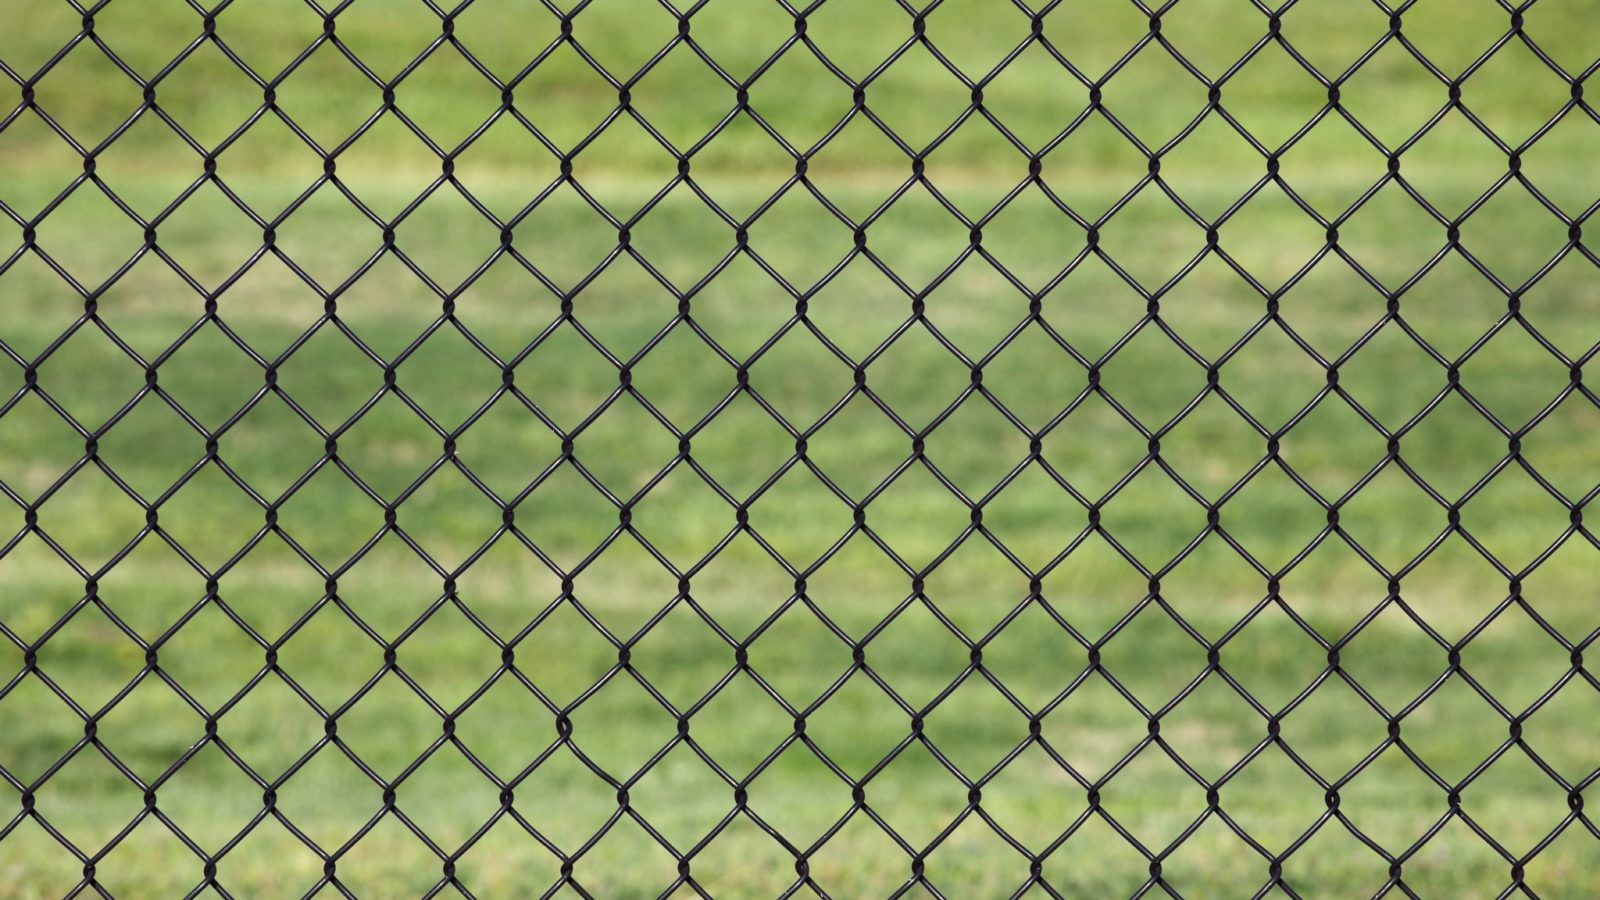 How To Repair A Chain Link Fence Video The Money Pit